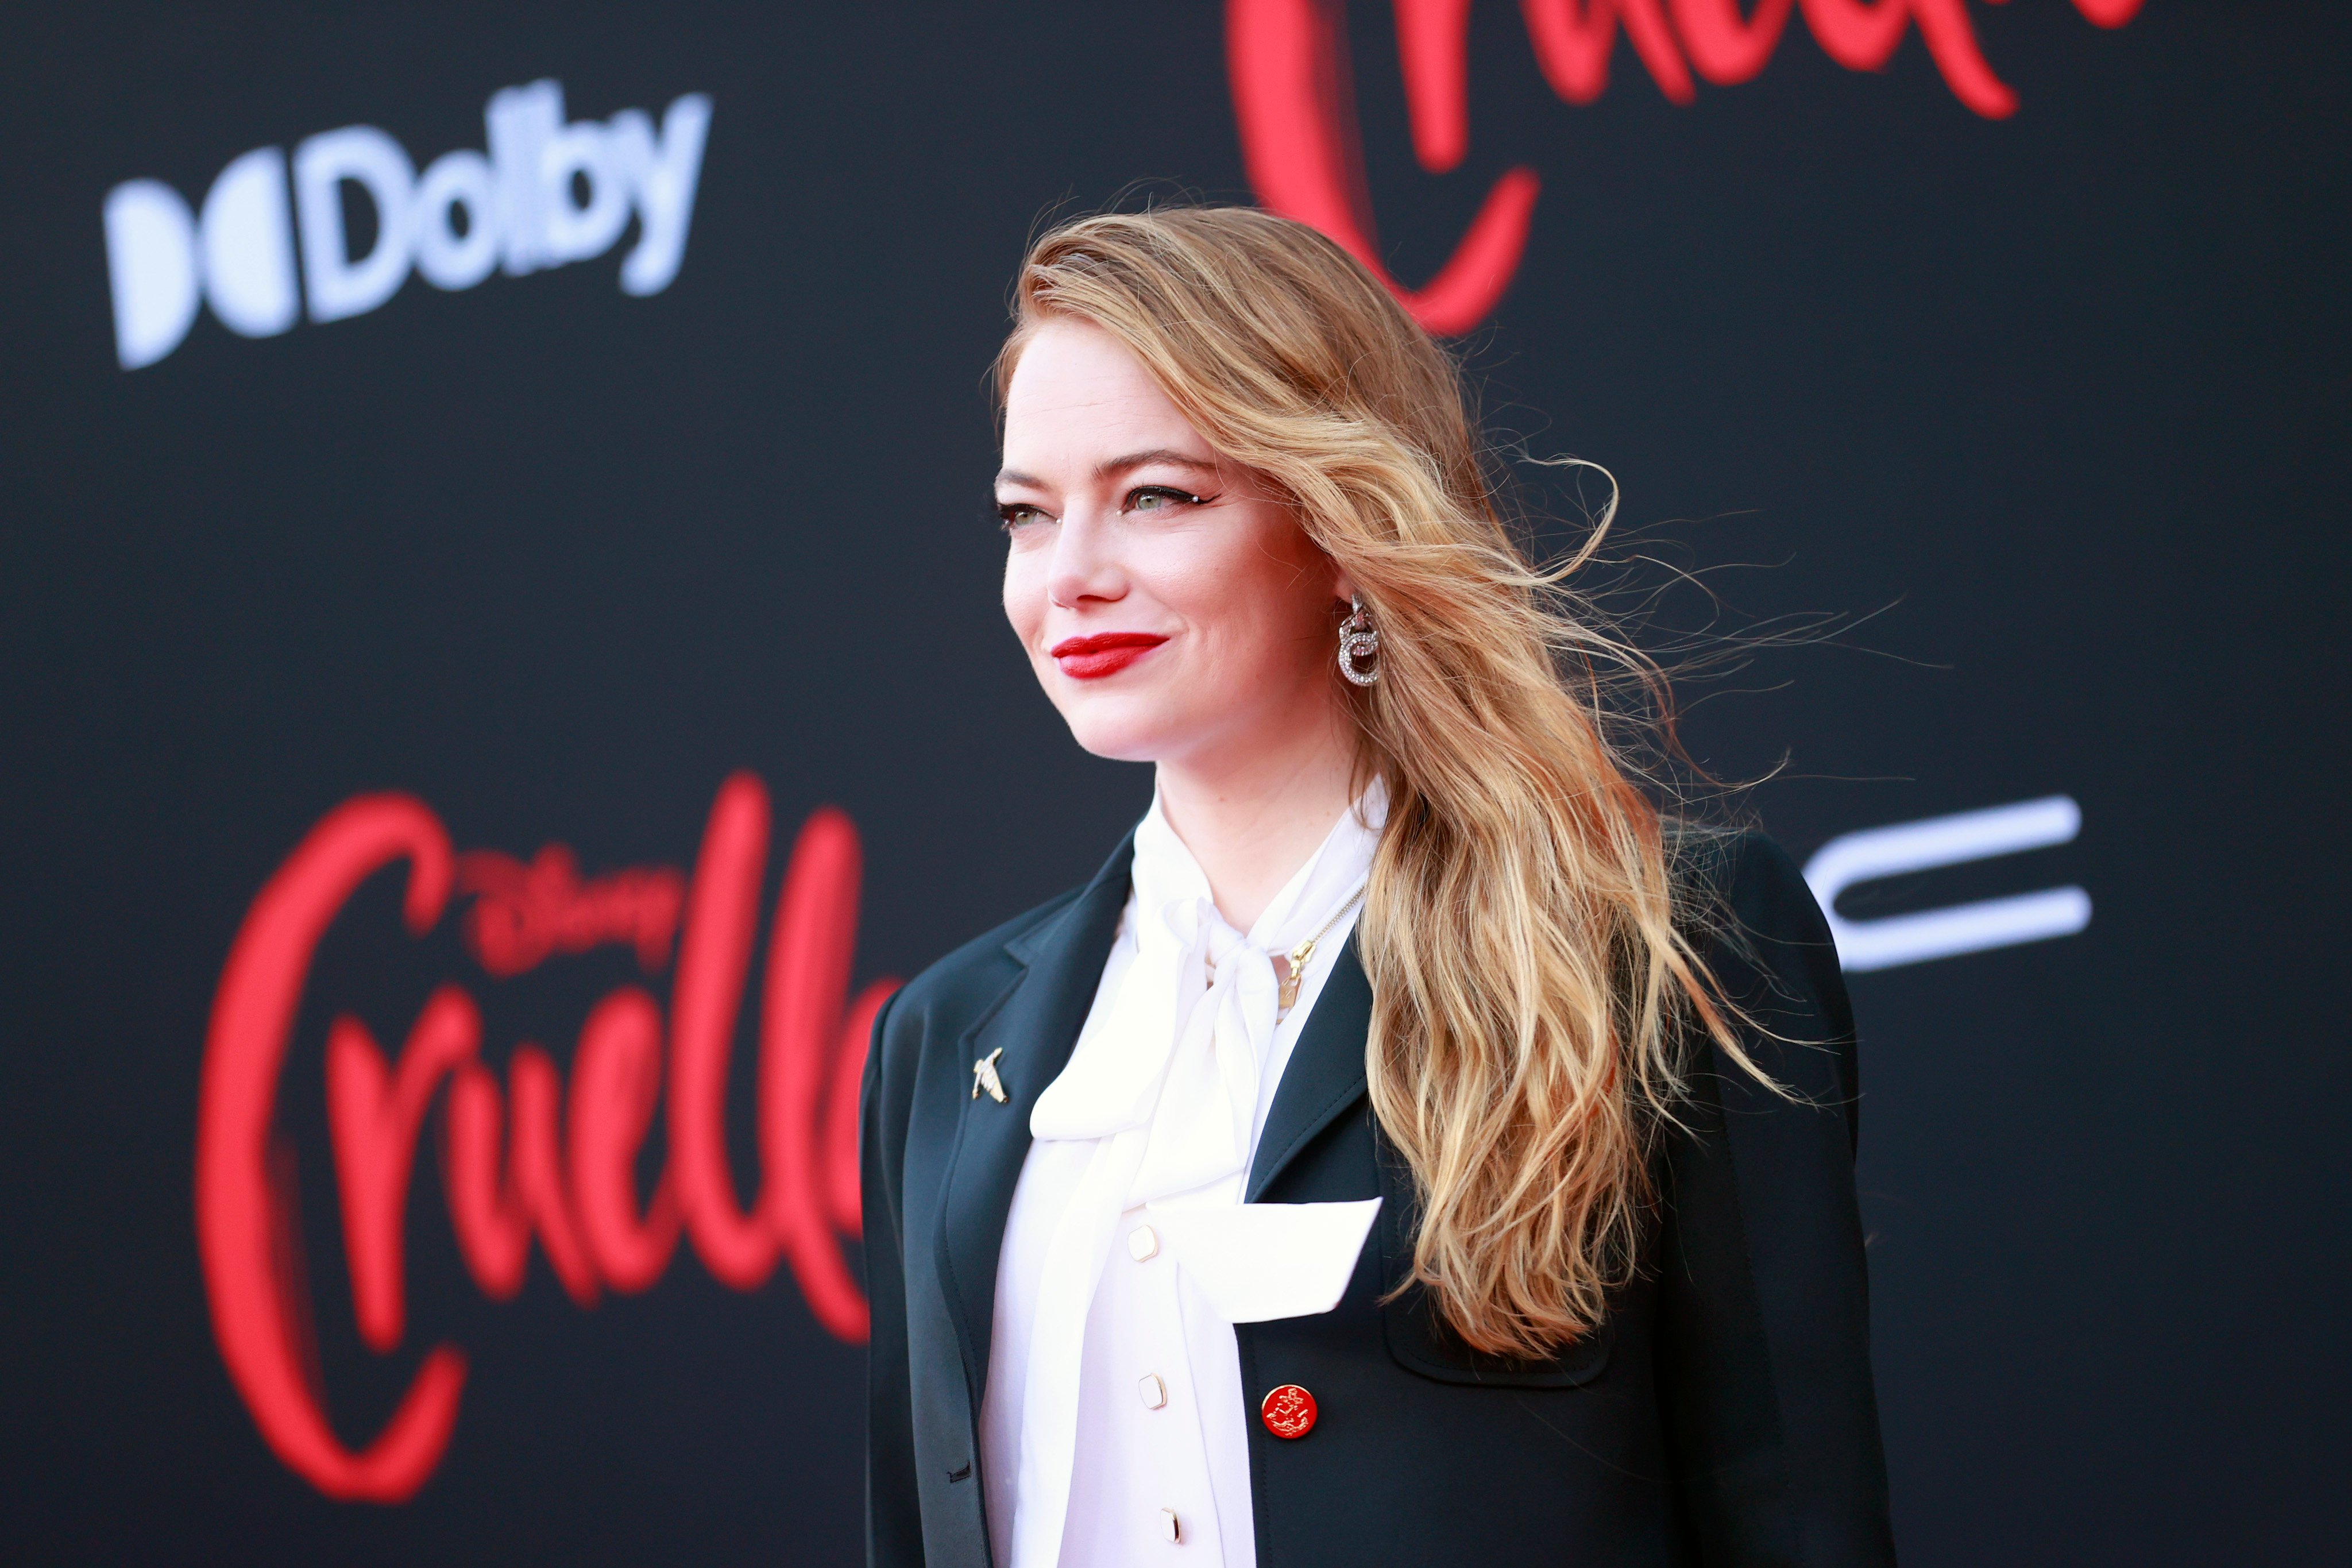 Is ‘Cruella’ Star Emma Stone Following in Scarlett Johansson’s Footsteps and Suing Disney Now Too?